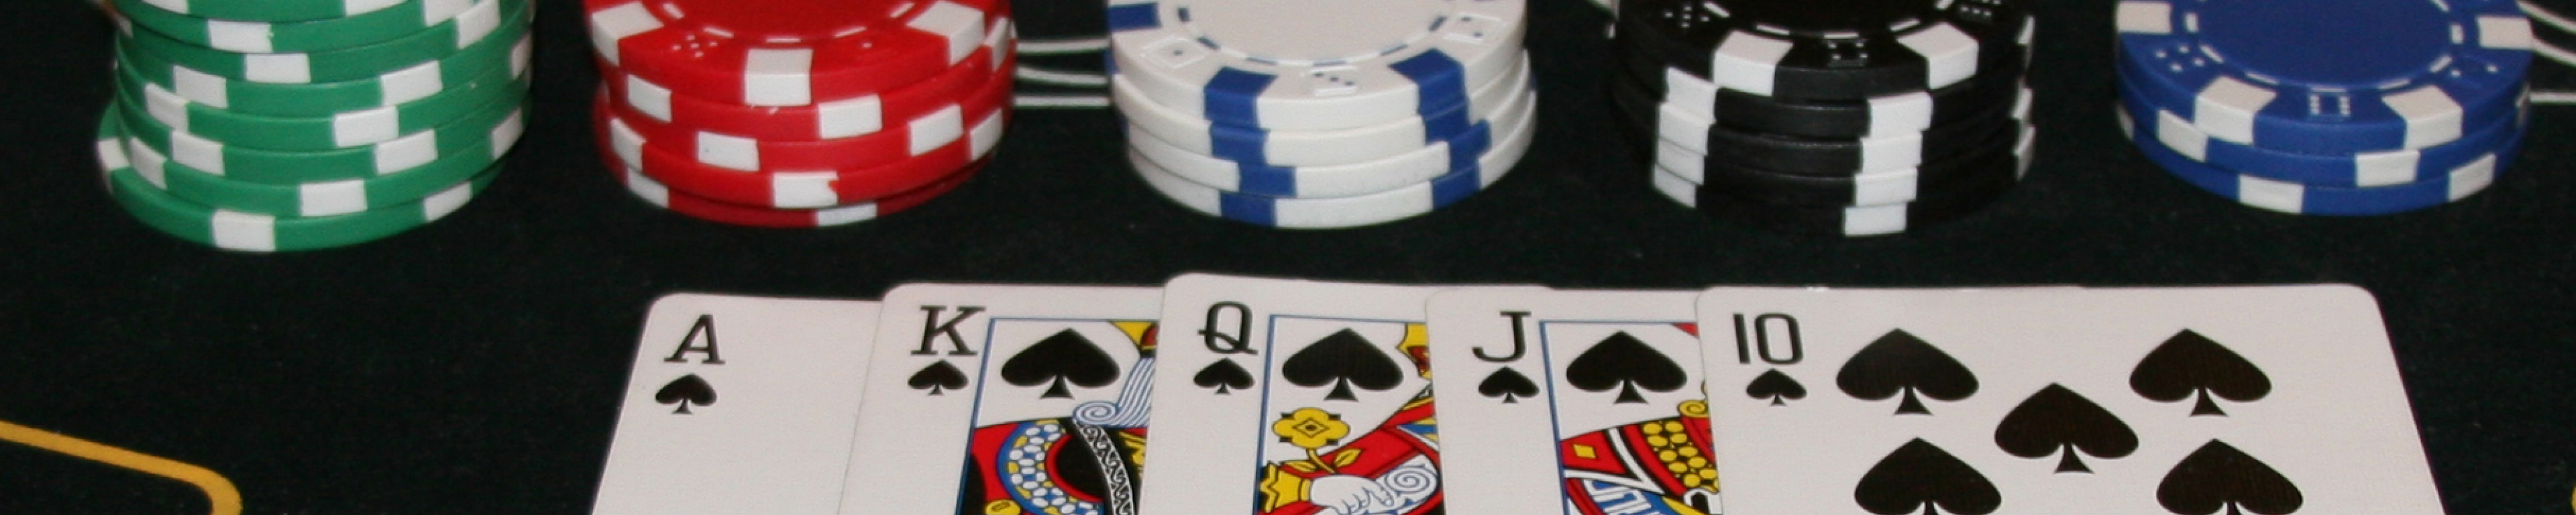 Poker chips in green, red, white and black arranged in a row with a royal flush of cards in Ace, King, Queen, Jack and 10 of spades all laid out in front of chips